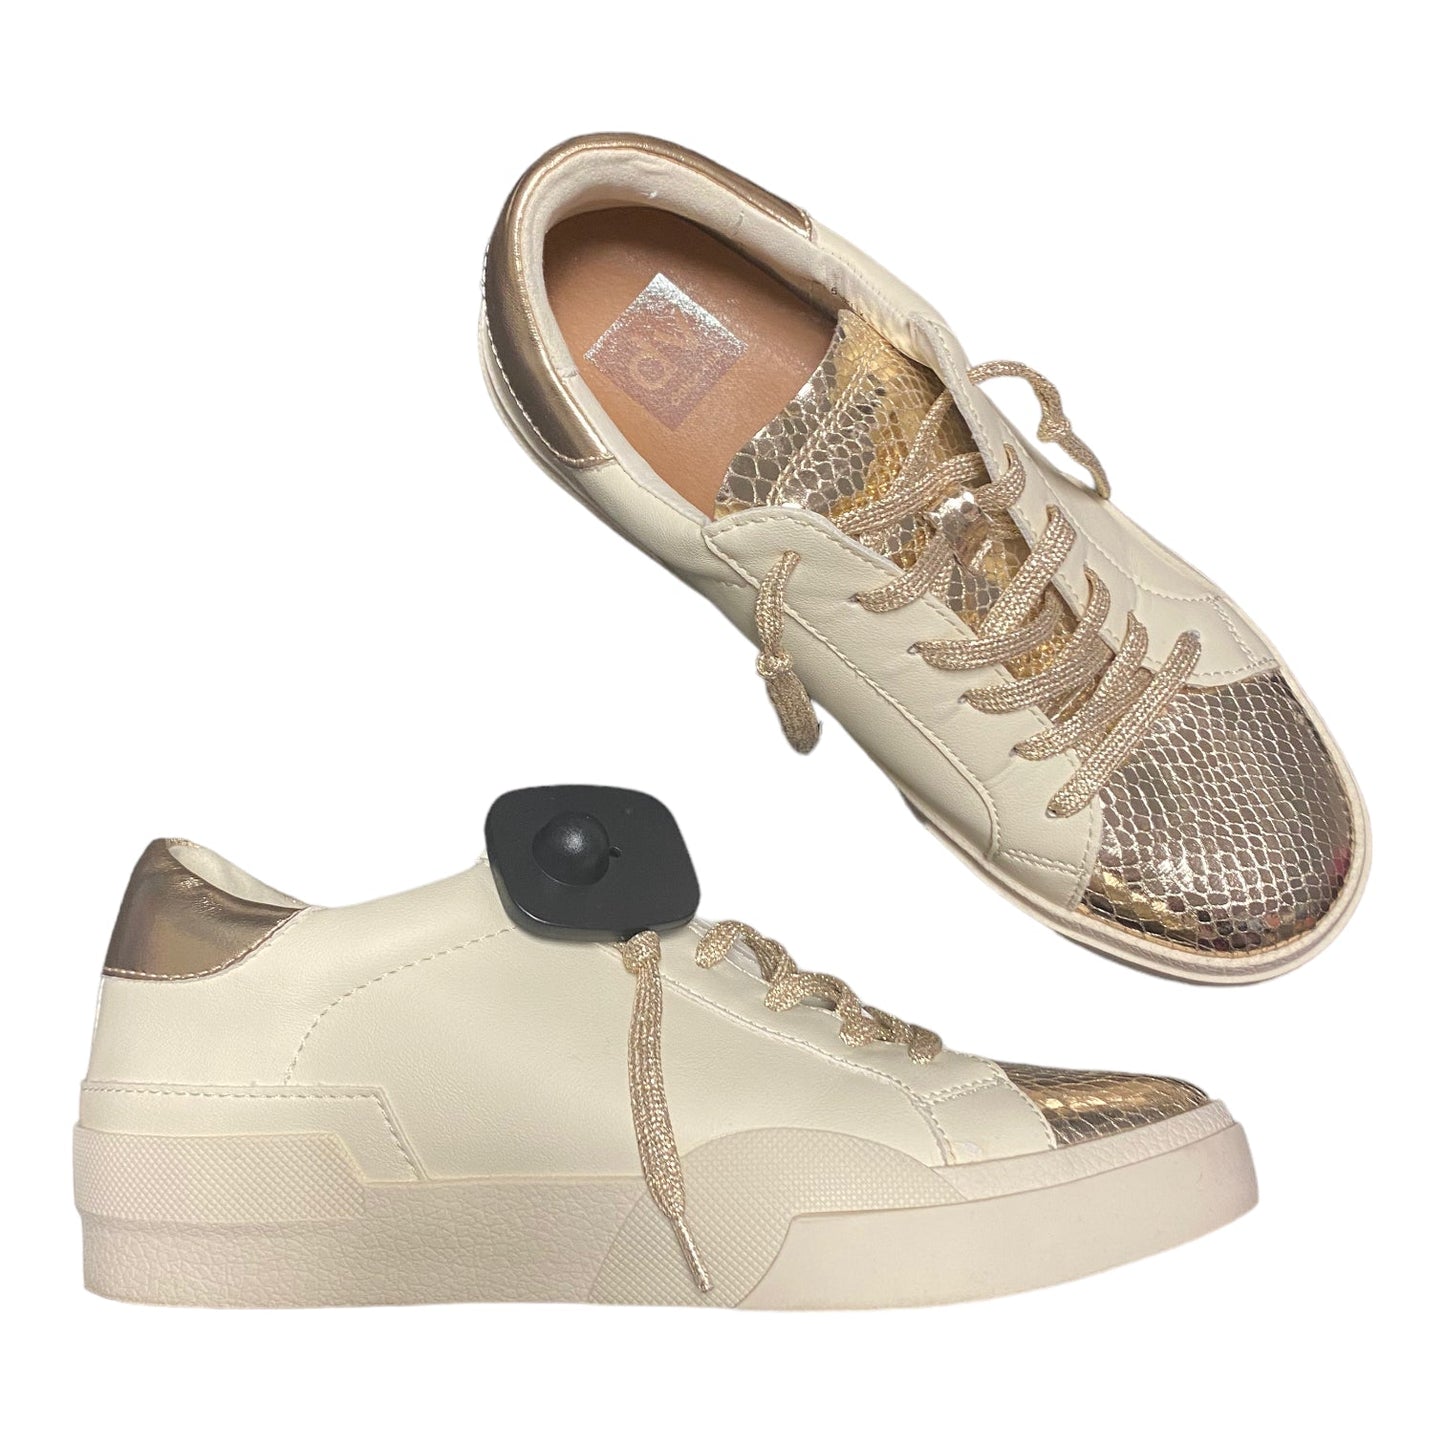 Cream Shoes Sneakers Dolce Vita, Size 8.5